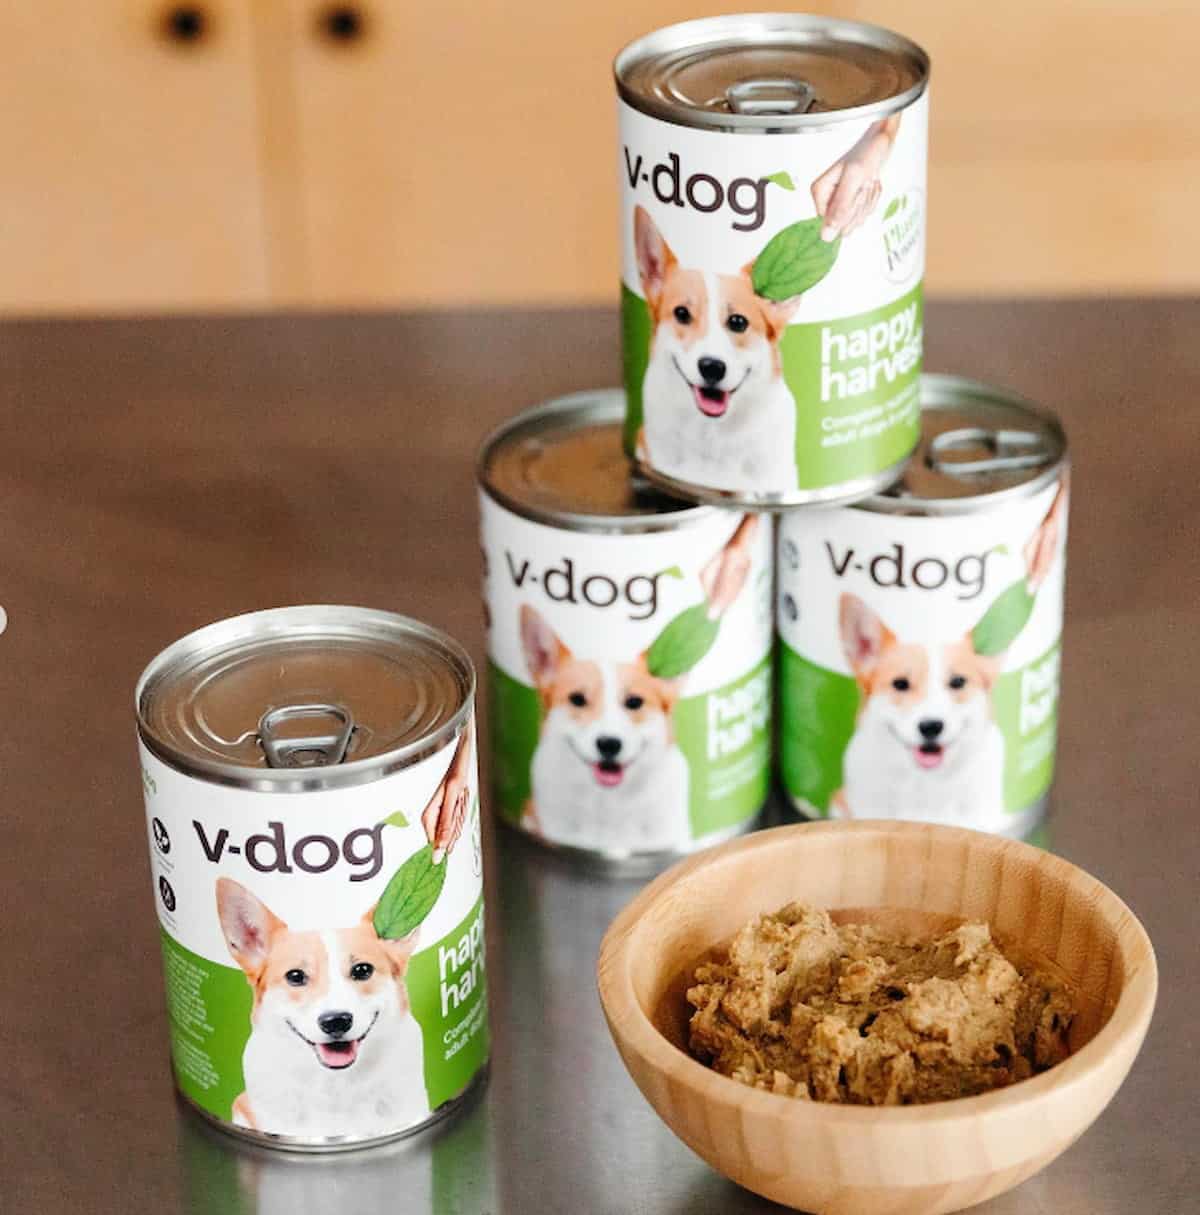 Cans of V-Dog's Happy Harvest dog food next to a bowl of it.